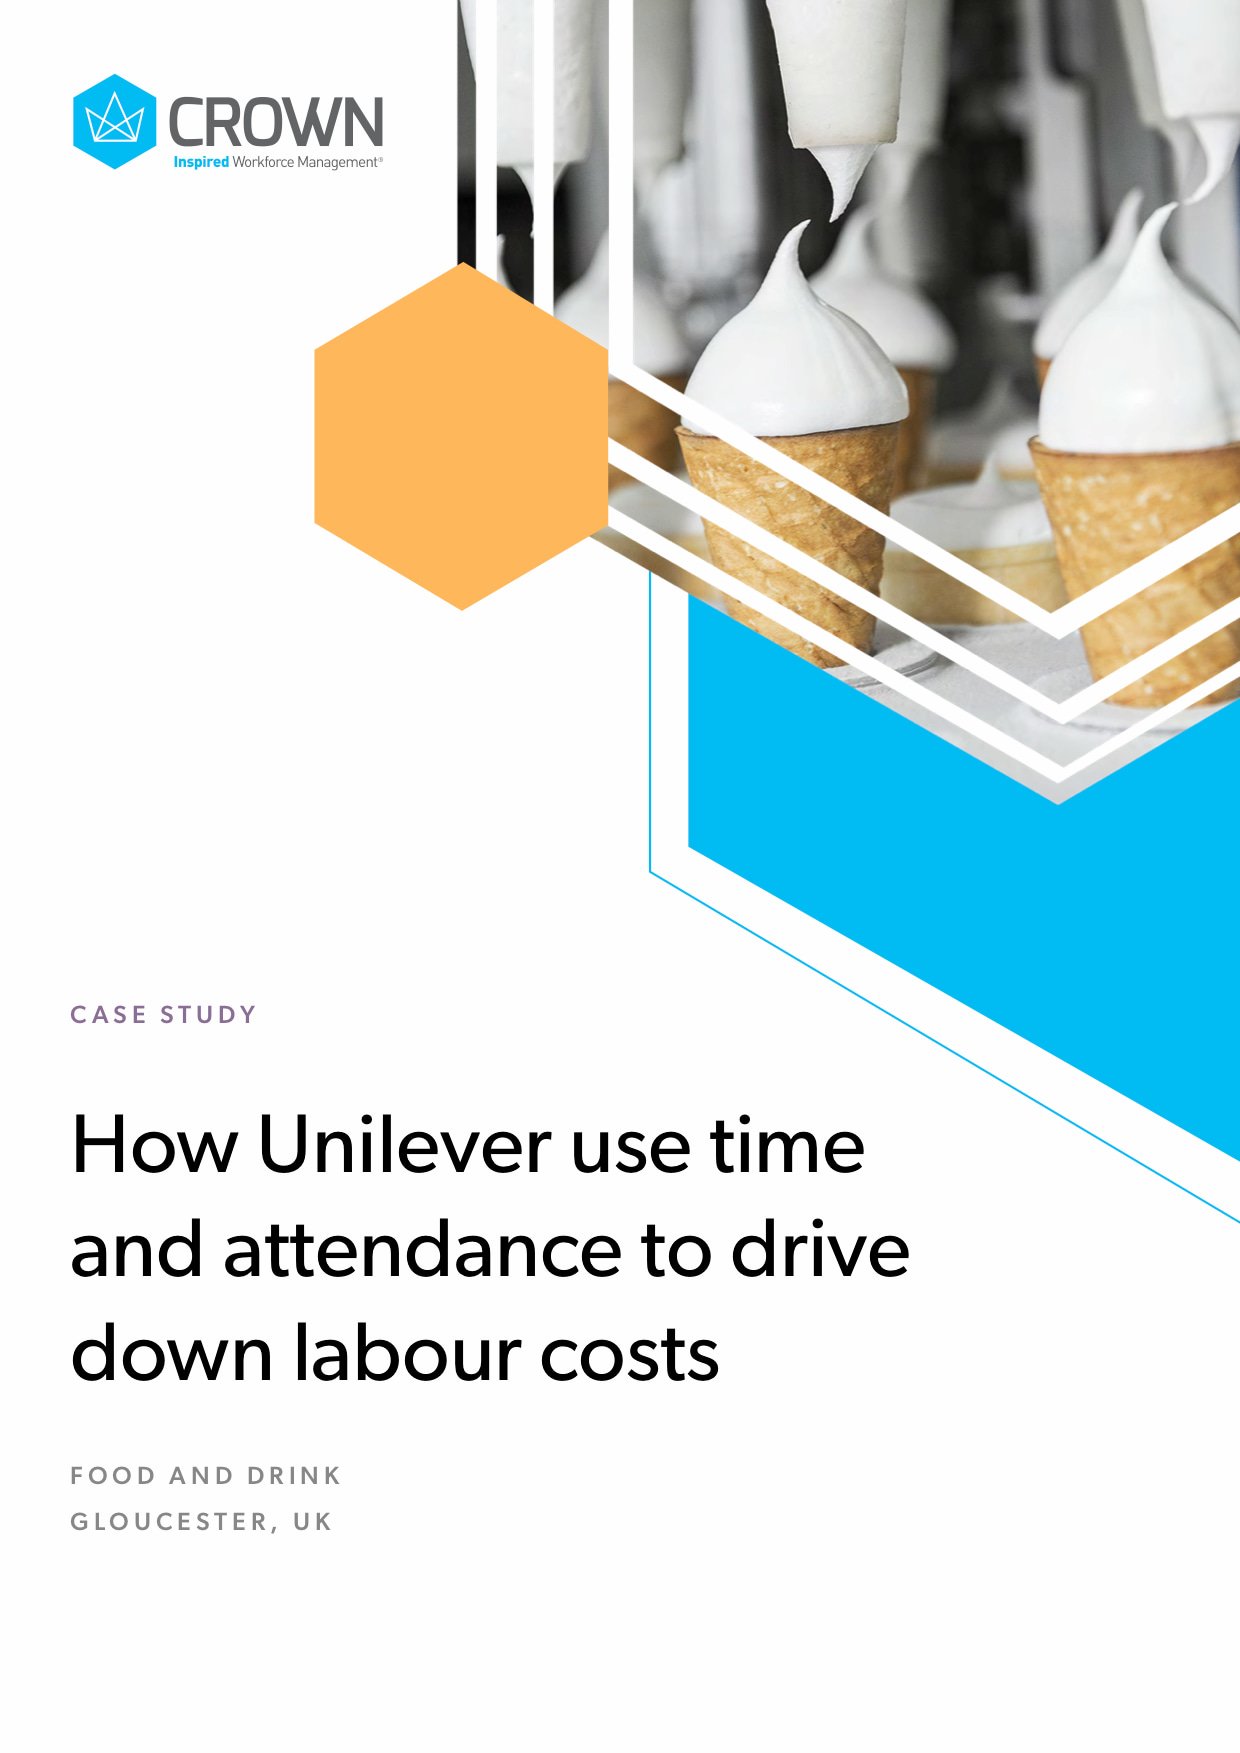 How Unilever use time and attendance to drive down labour costs